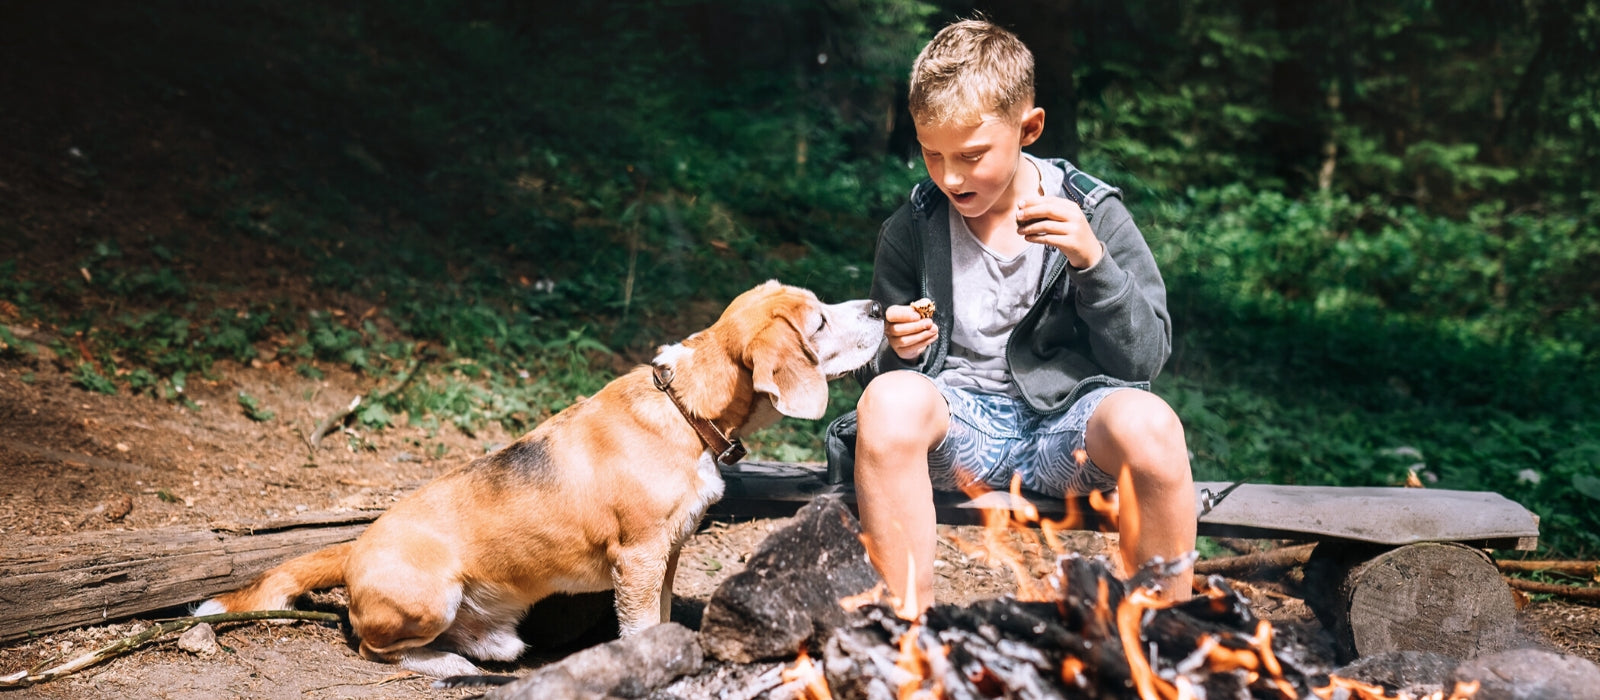 Safety Tips For Camping With Your Pet